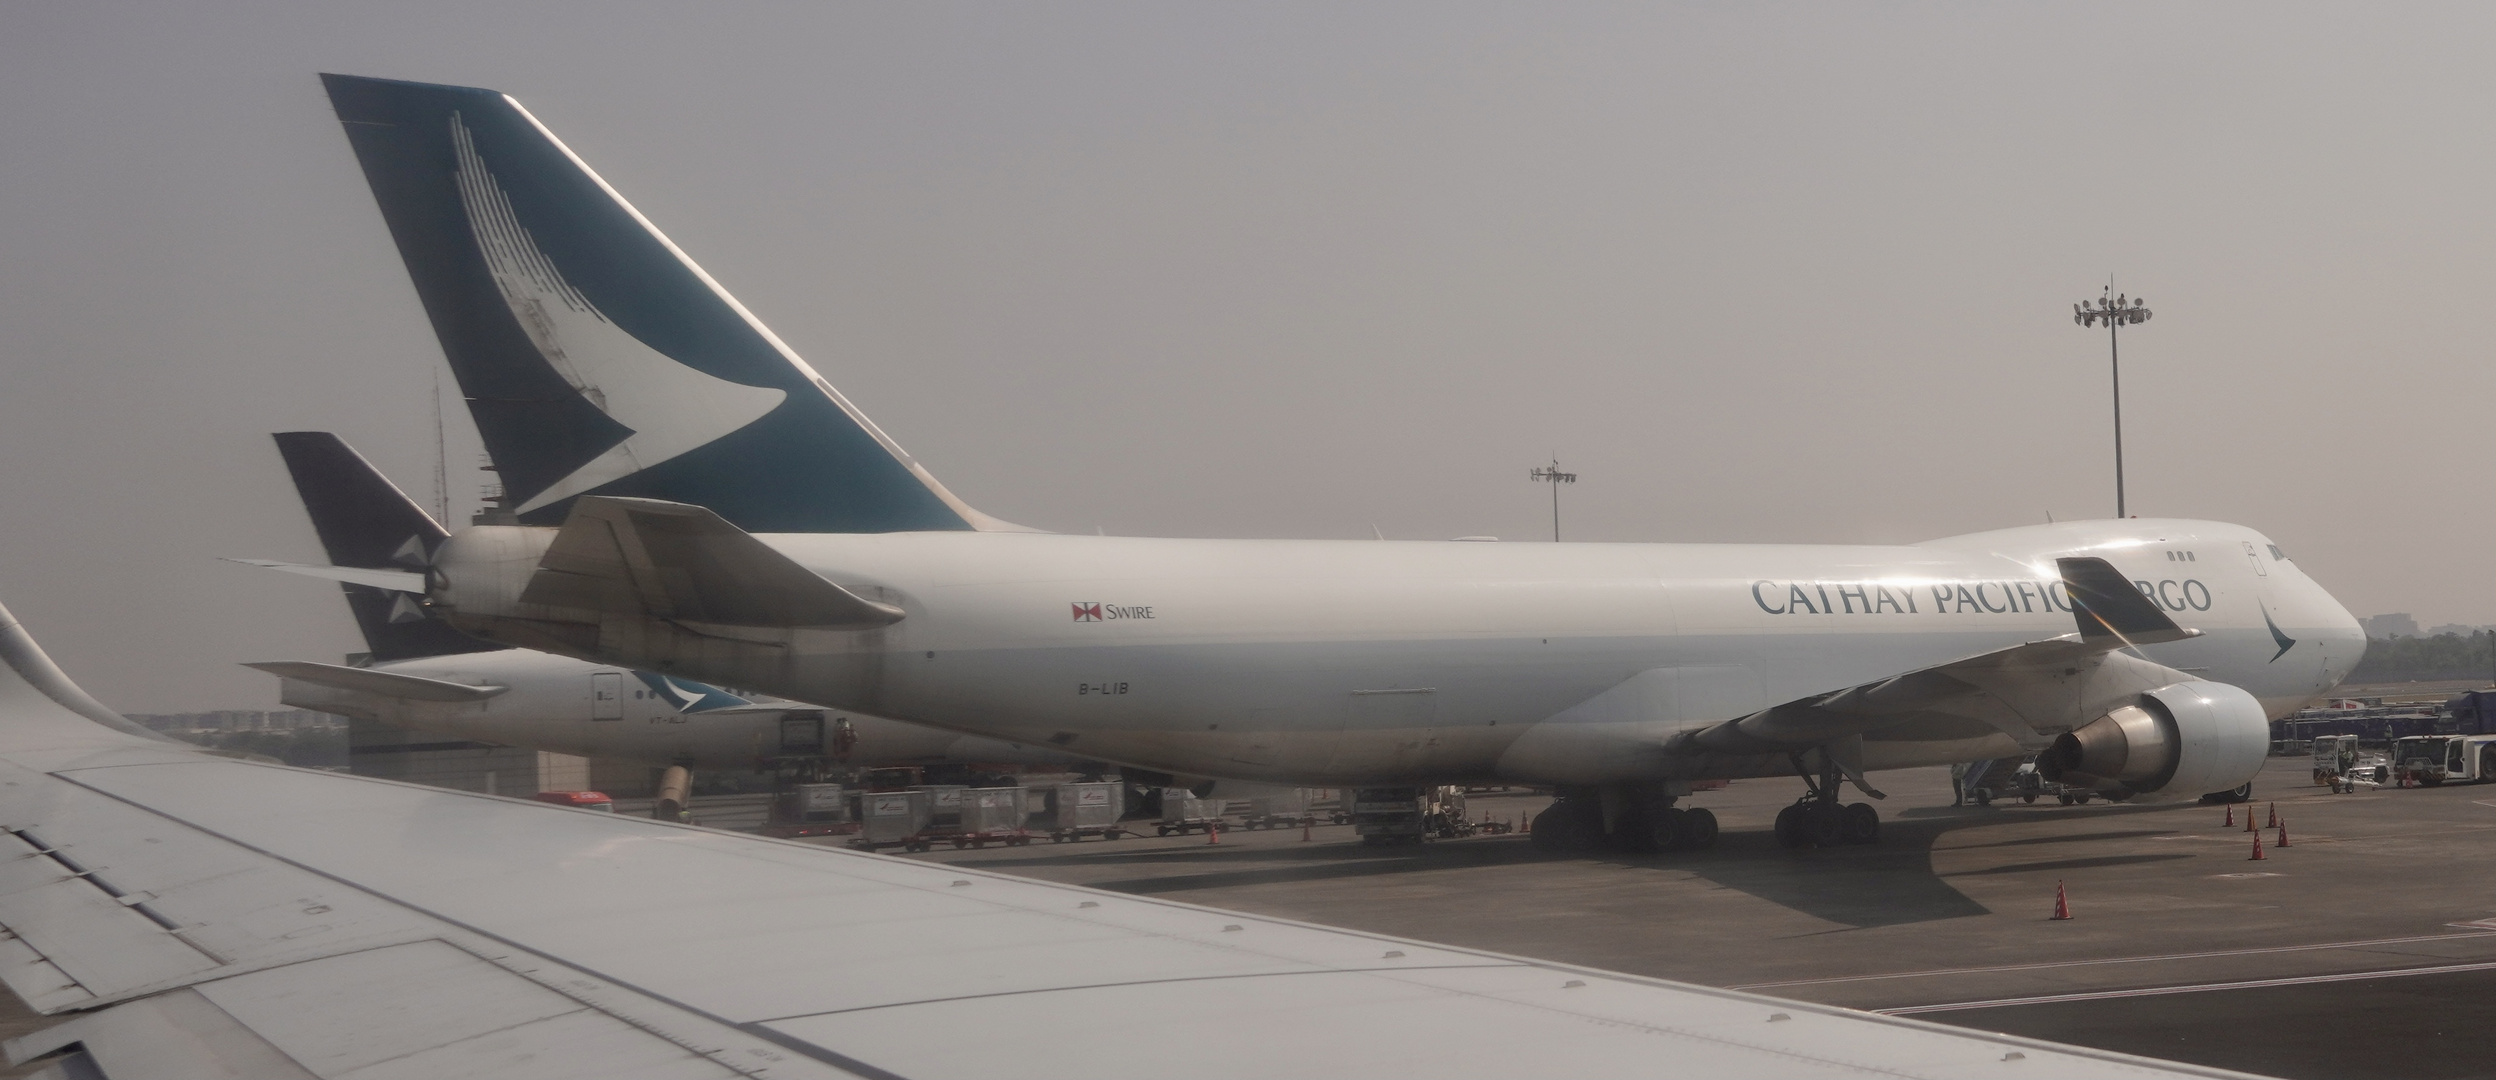 Boeing 747F der Cathay Pacific